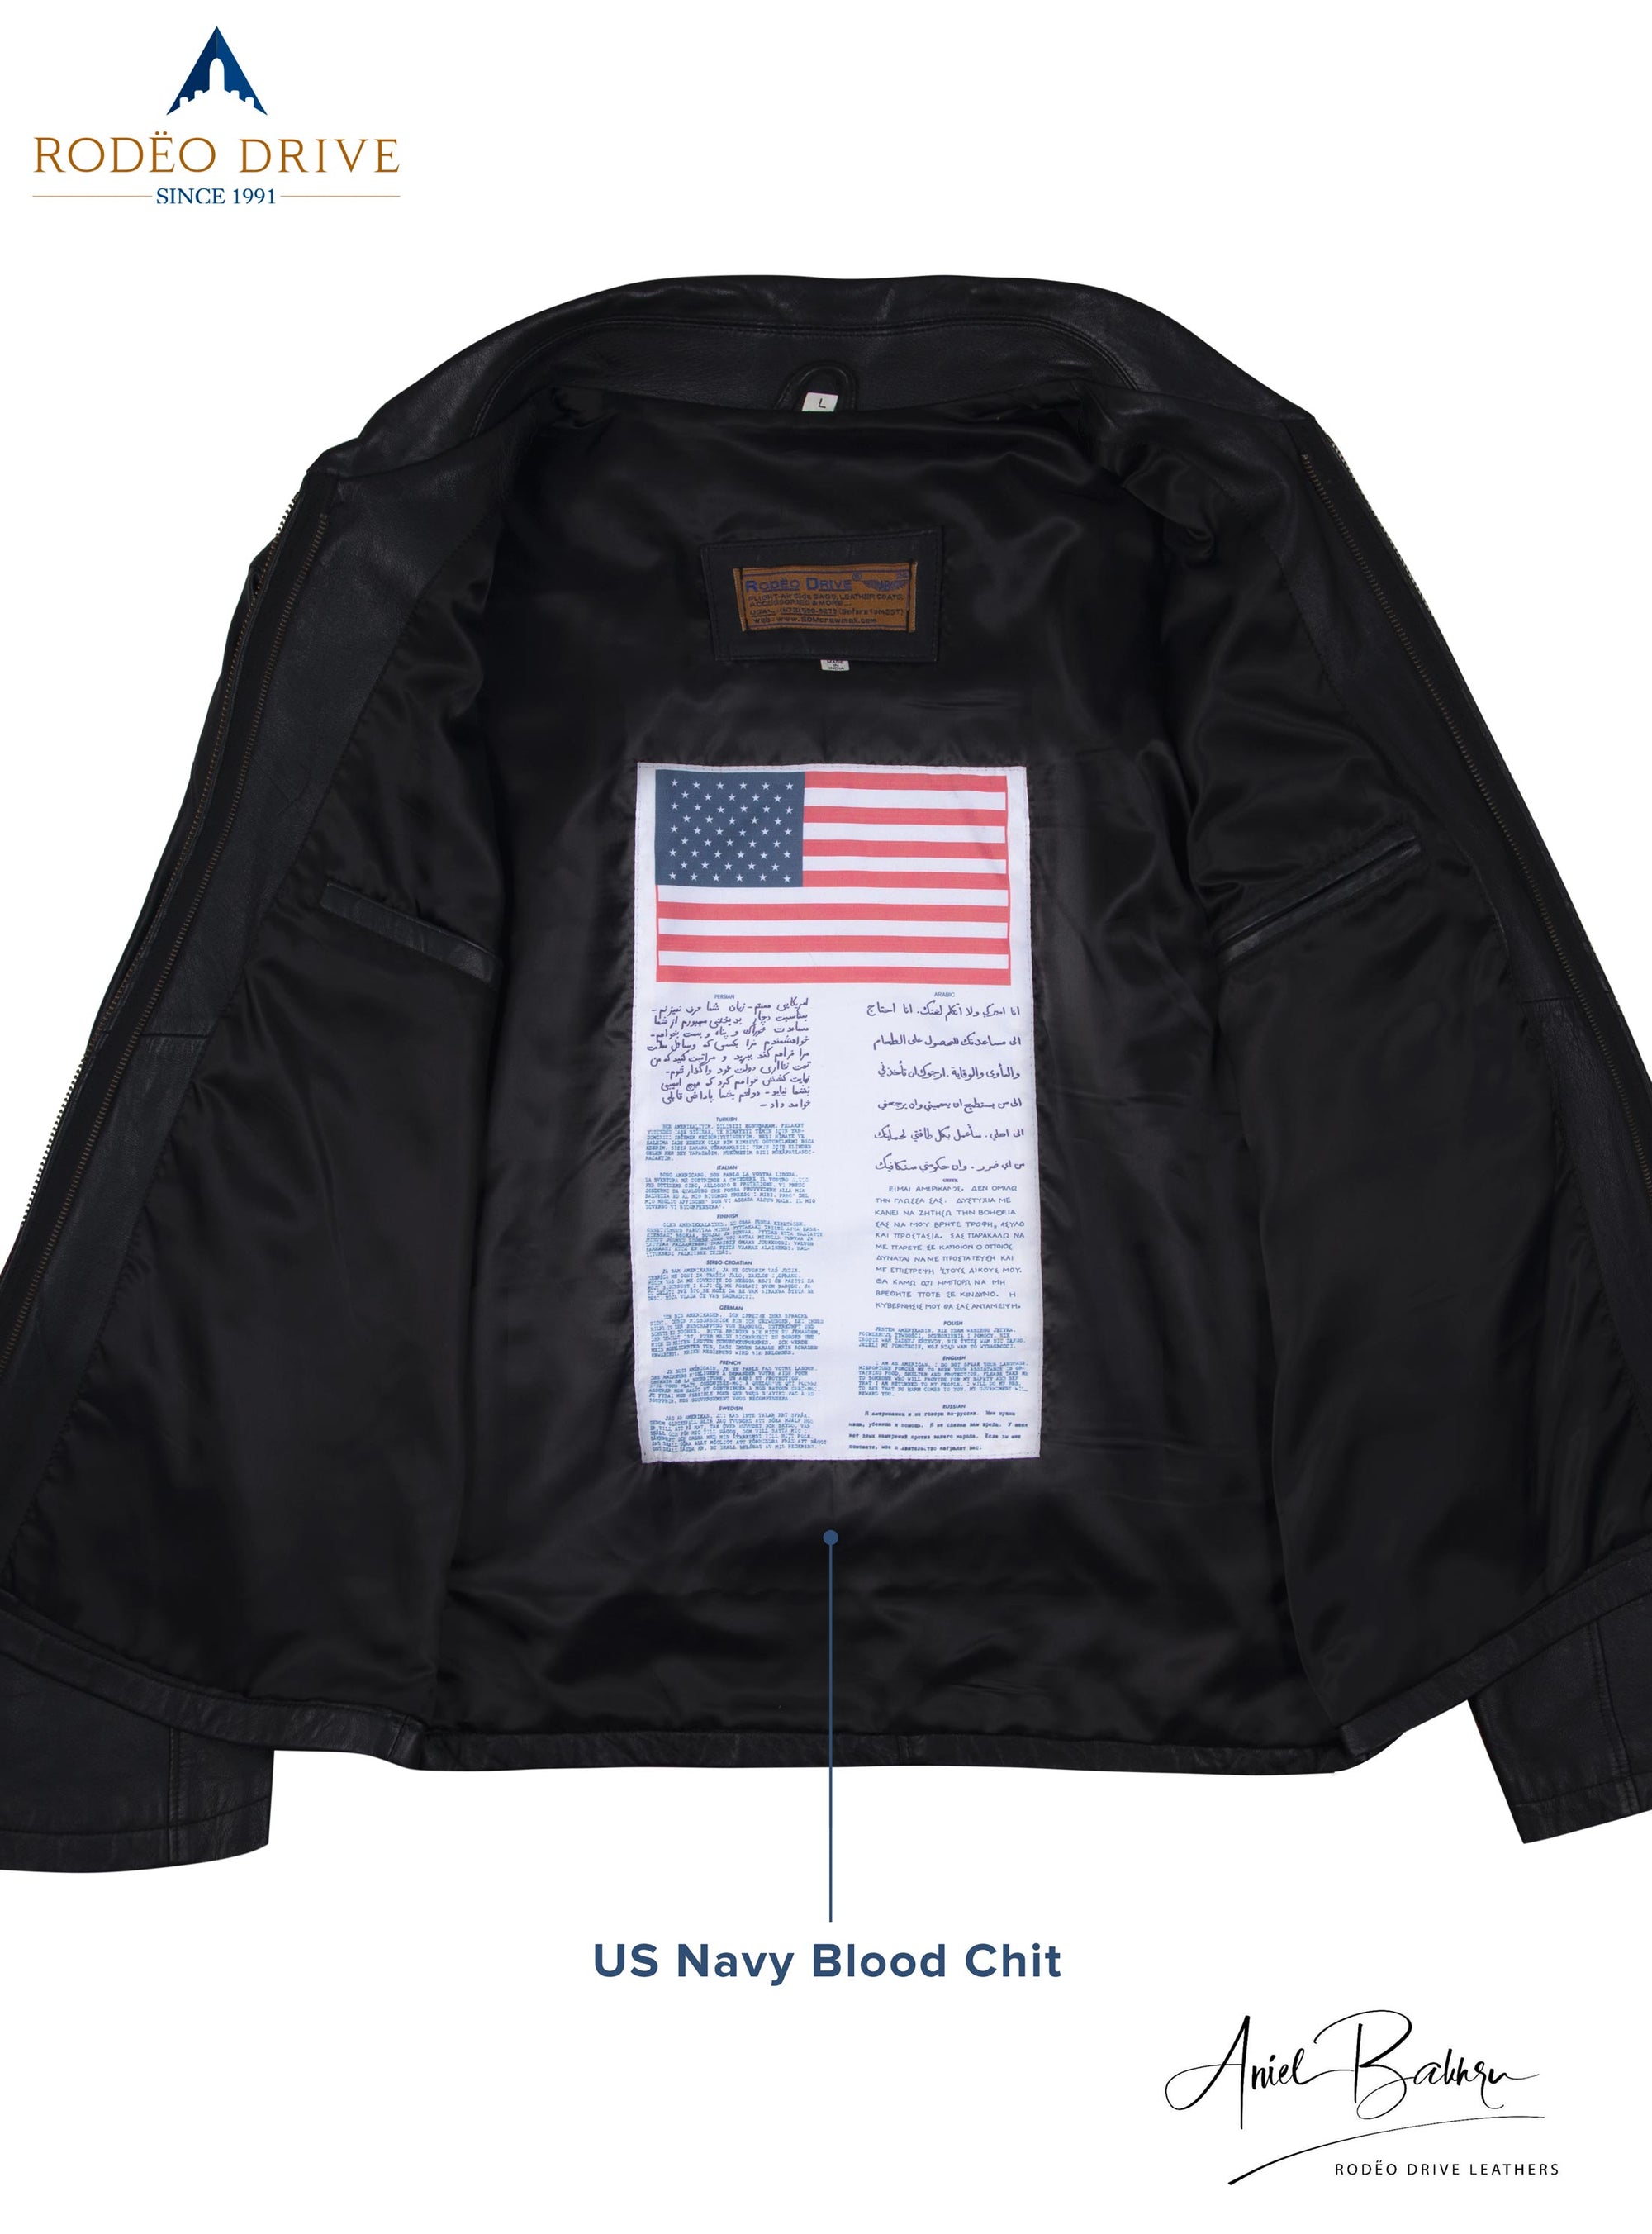 inside image of black leather jacket. A US navy Blood chit is sewed inside it